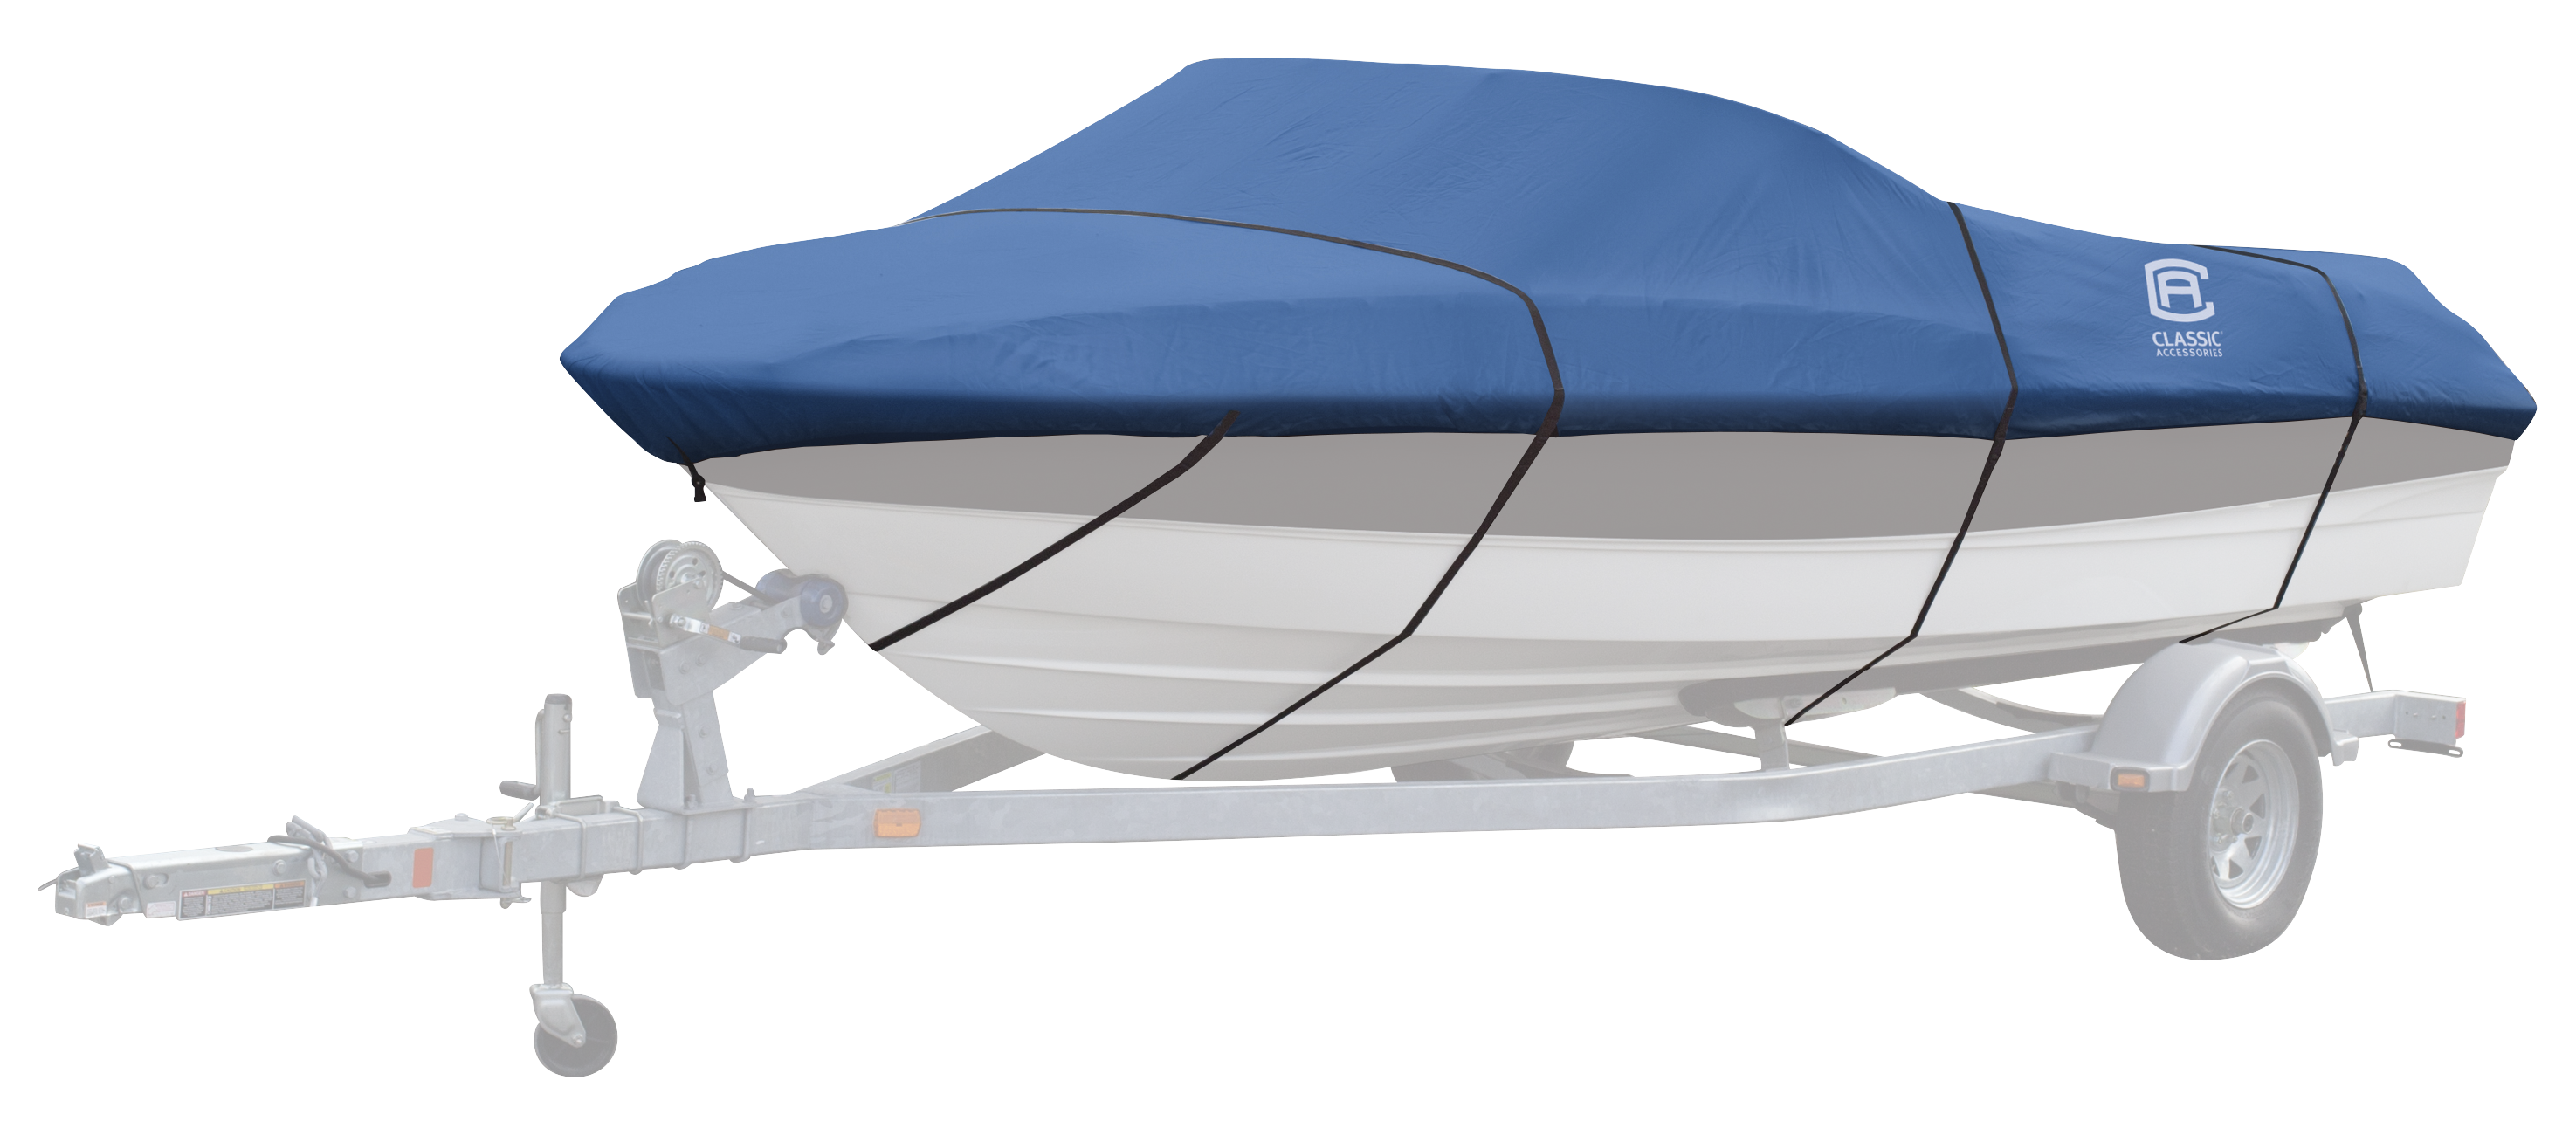 14'-16' Waterproof Trailerable Fishing Boat Cover 75 Beam-Includes Support  Pole